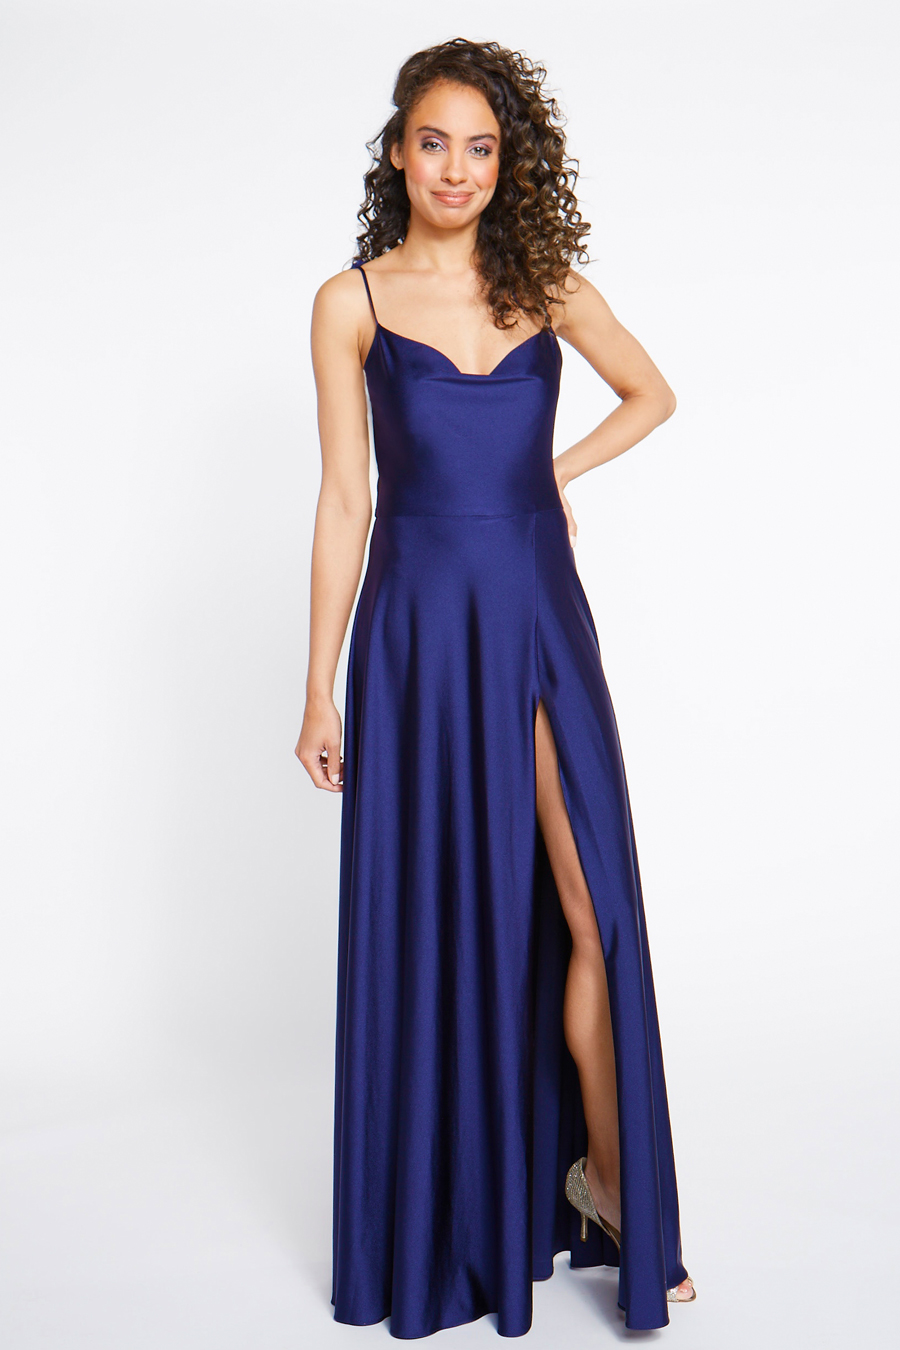 Front view of navy bridesmaid dress with cowl bodice and wrap ball skirt